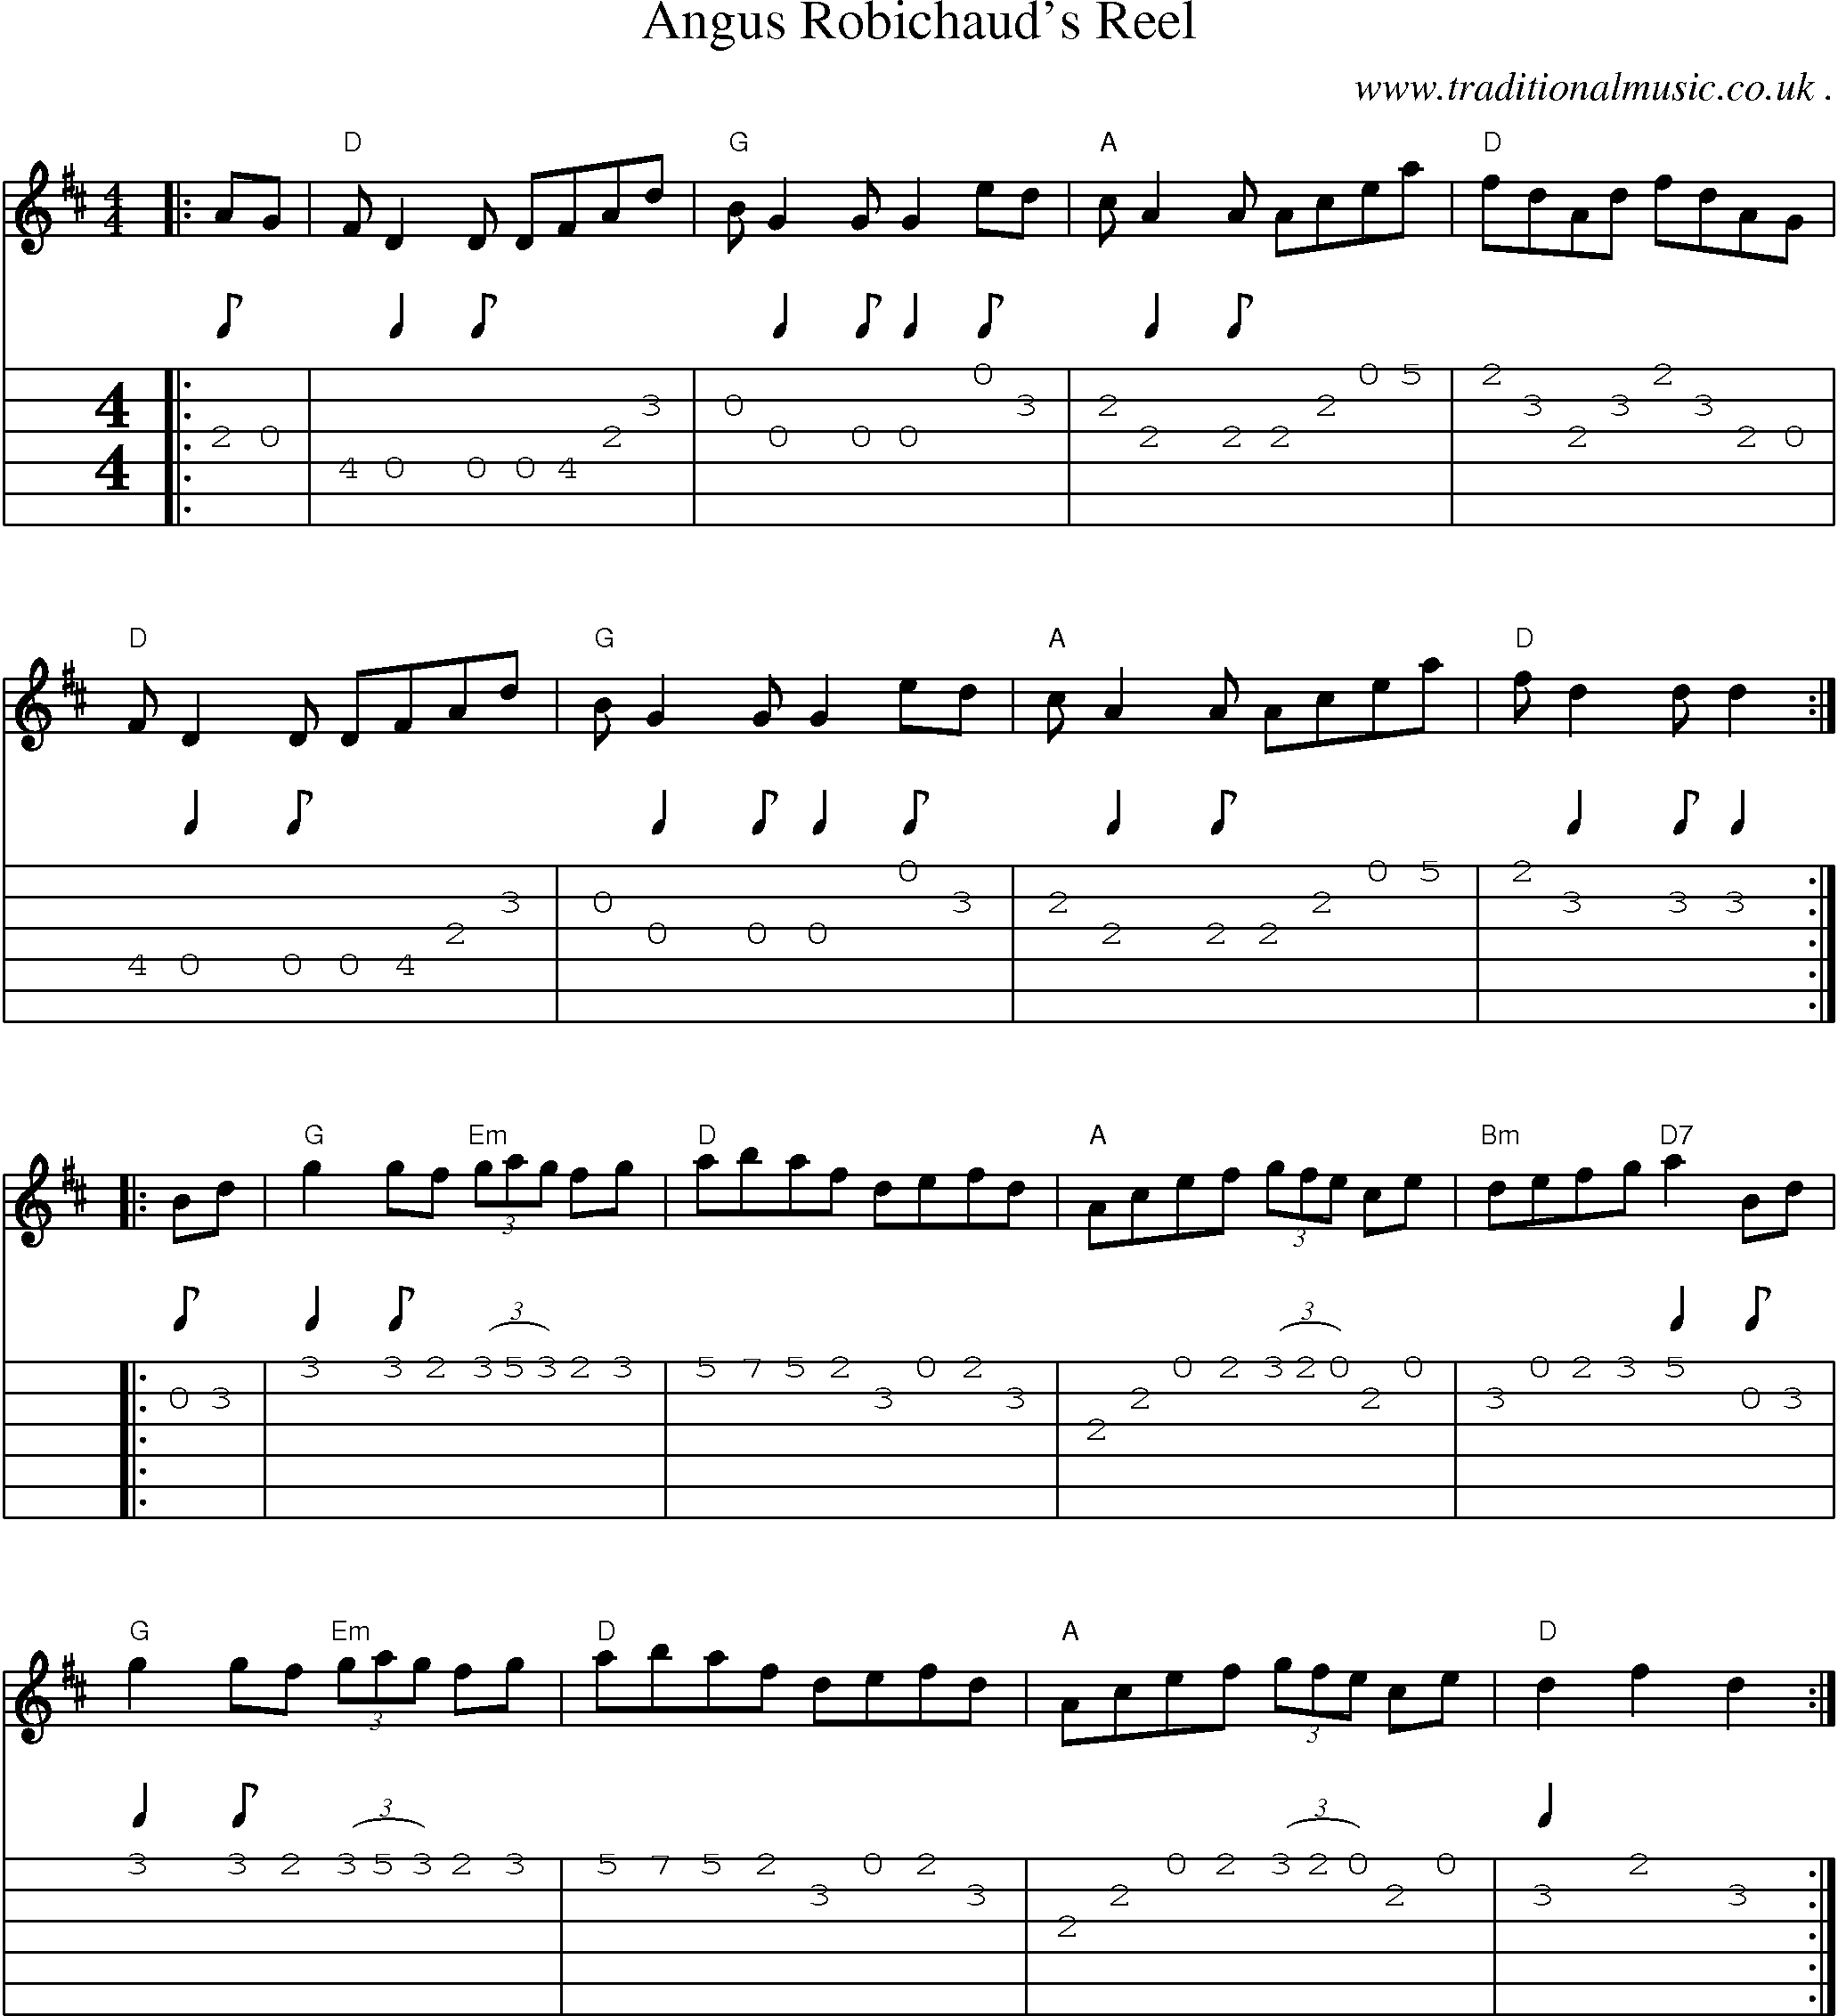 Music Score and Guitar Tabs for Angus Robichauds Reel